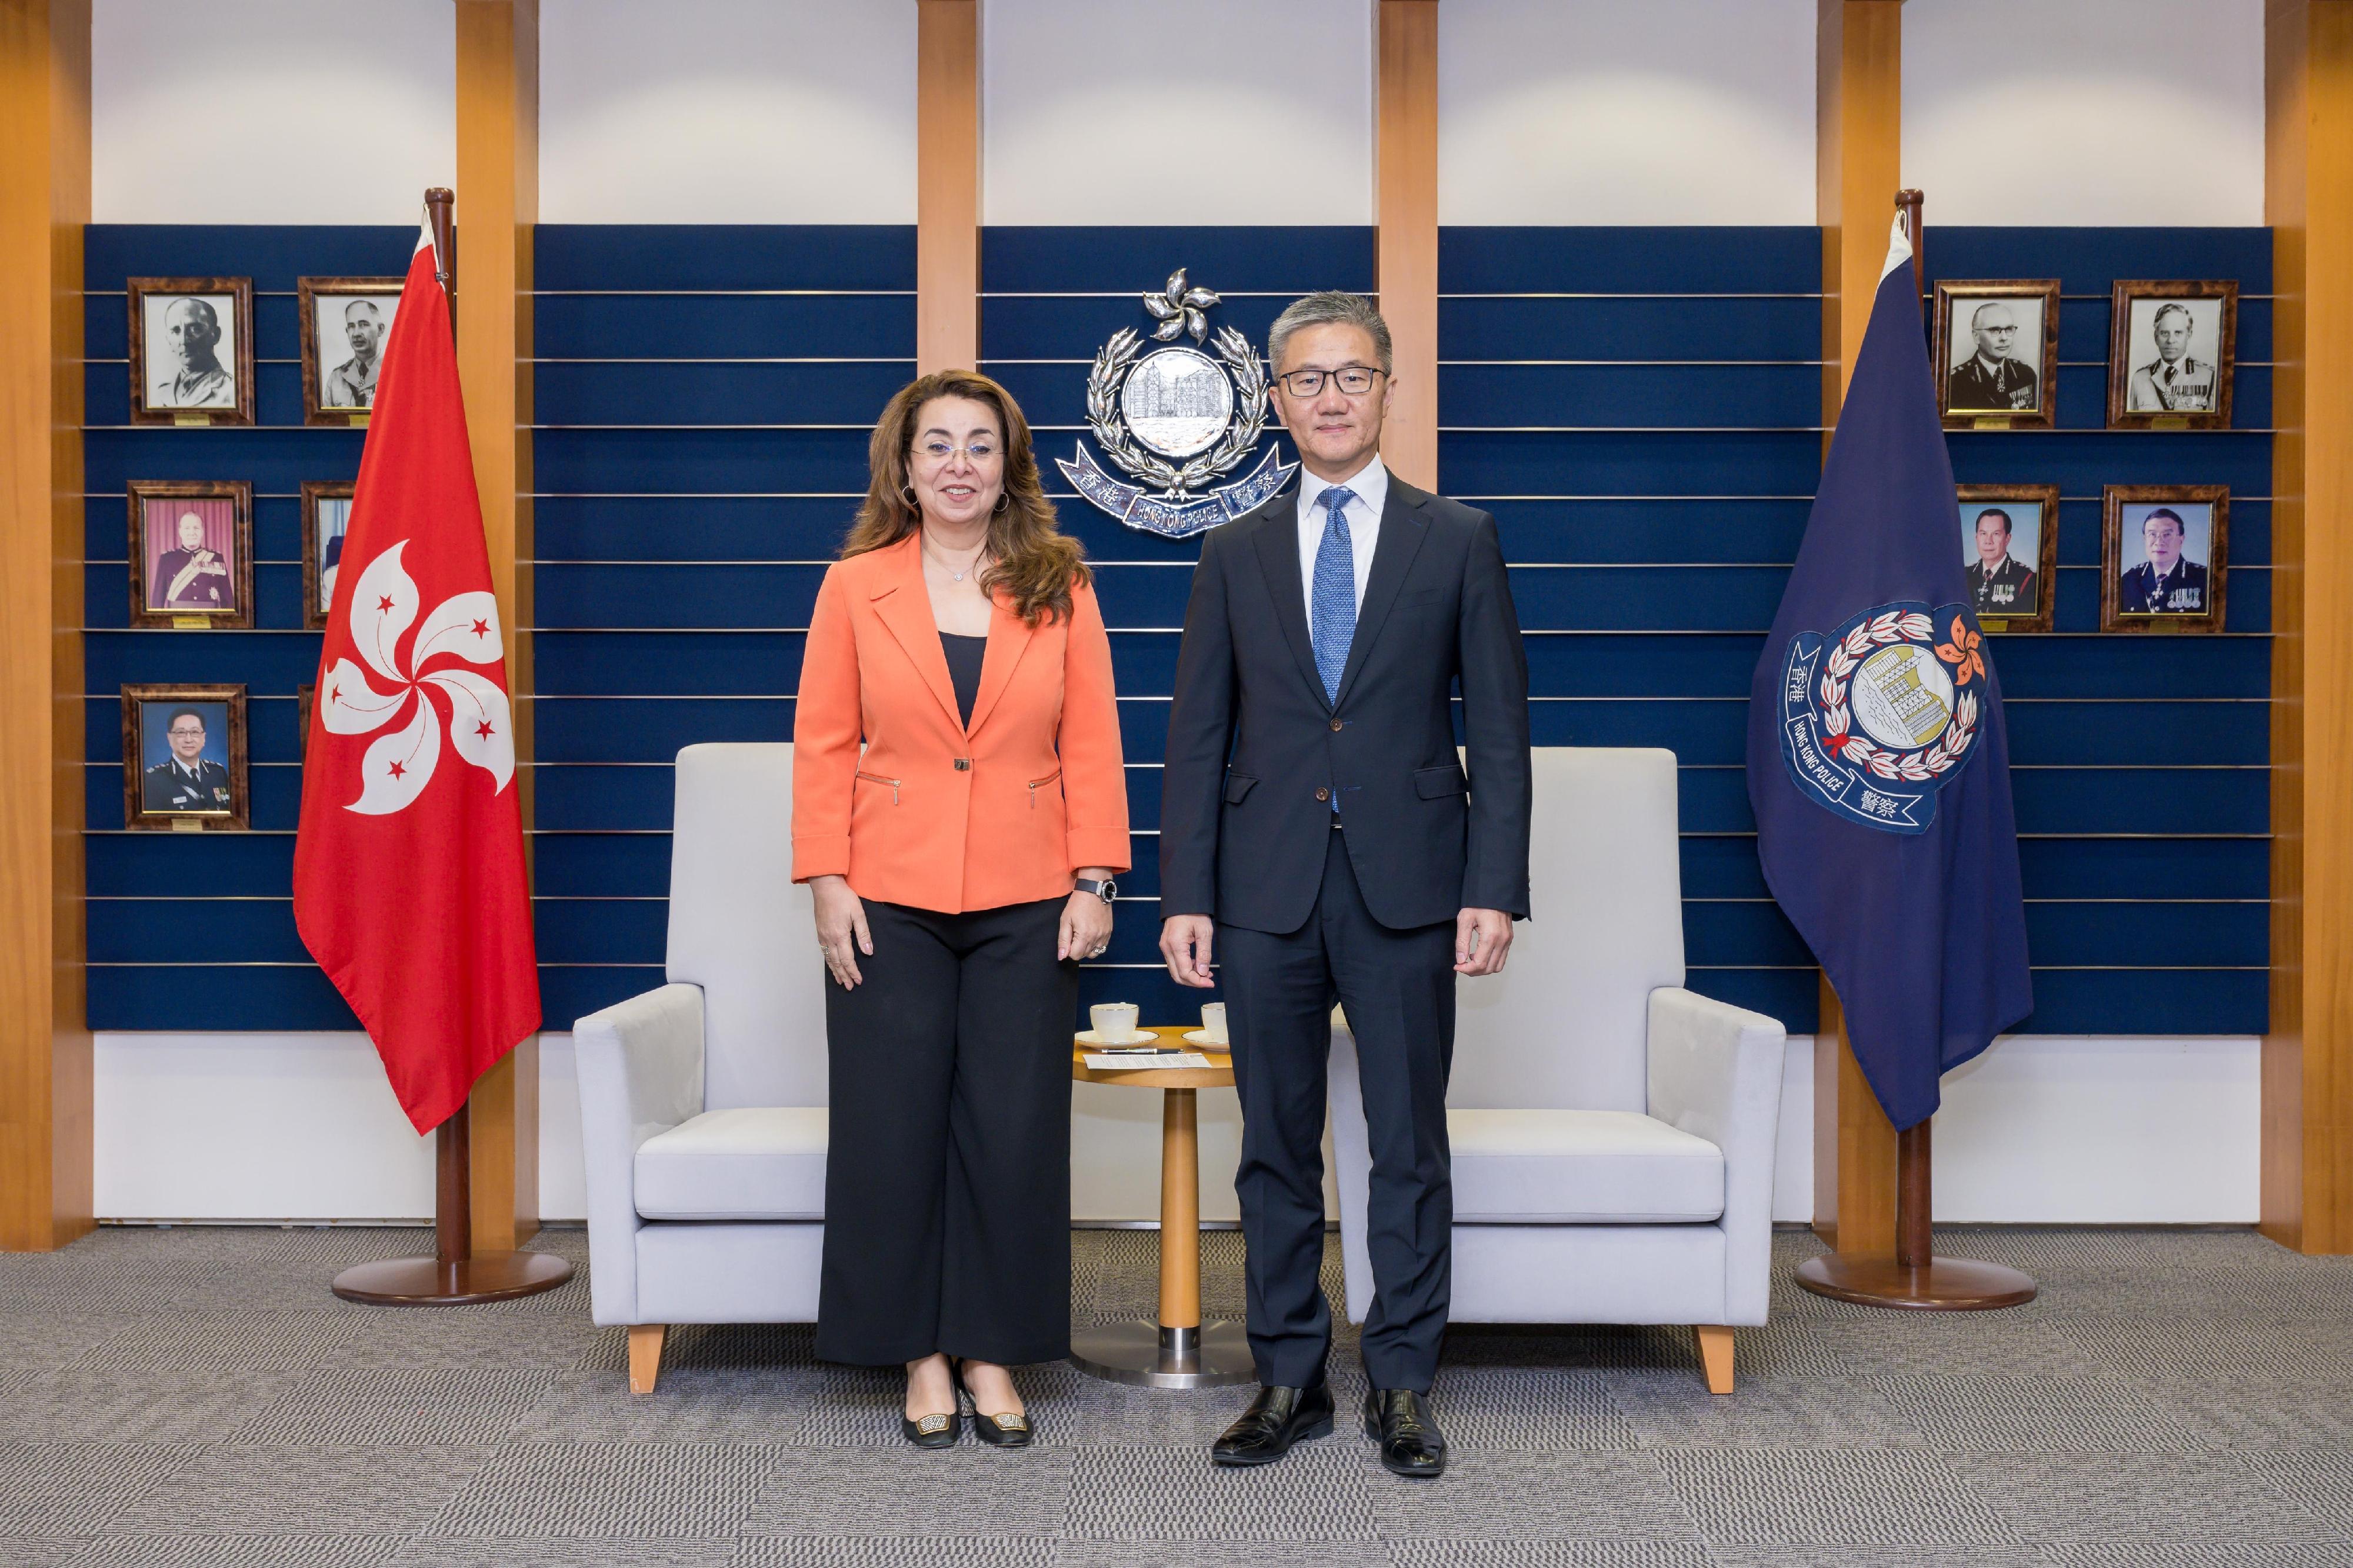 The Acting Secretary for Security, Mr Michael Cheuk; the Commissioner of Police, Mr Siu Chak-yee; and the Commissioner of Customs and Excise, Ms Louise Ho, today (May 23) met with the Executive Director of the United Nations Office on Drugs and Crime and Director-General of the United Nations Office at Vienna, Ms Ghada Fathi Waly, and her delegation to exchange views on anti-crime and anti-drug strategies and efforts. Photo shows Ms Waly (left) paying a courtesy call on Mr Siu (right).